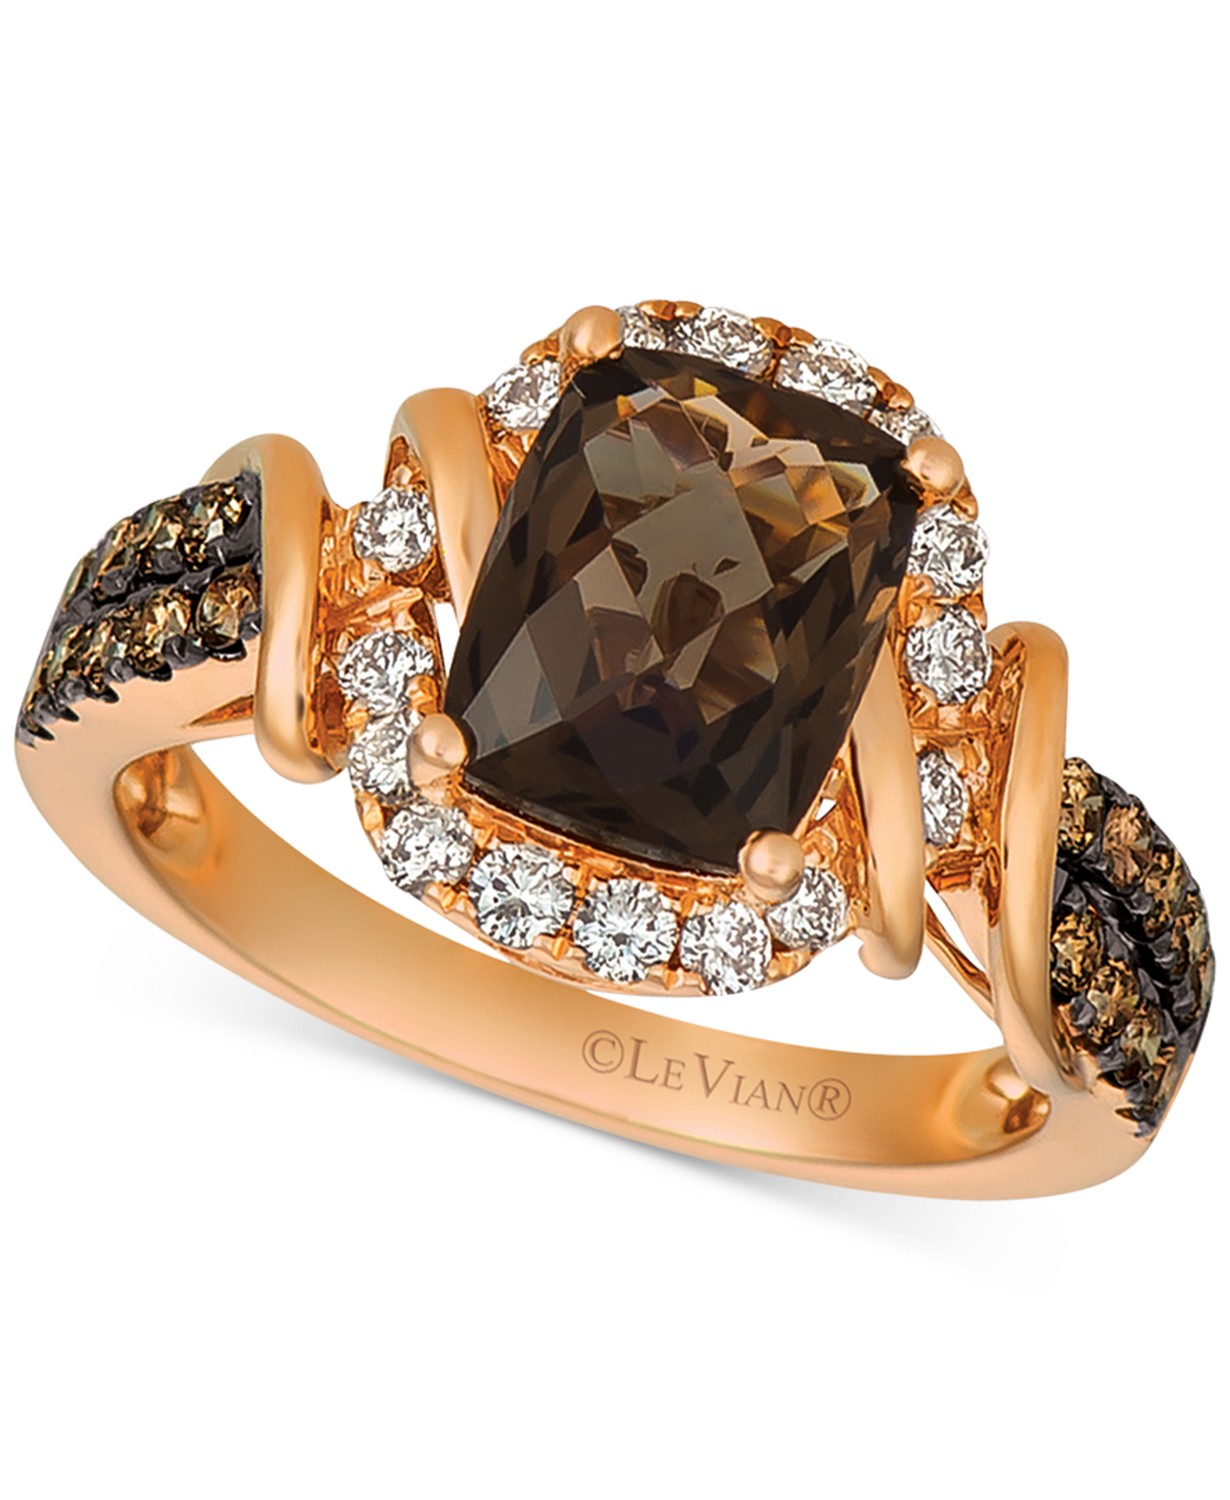 These 19 Chocolate Diamond Rings Are So Dreamy | Who What Wear